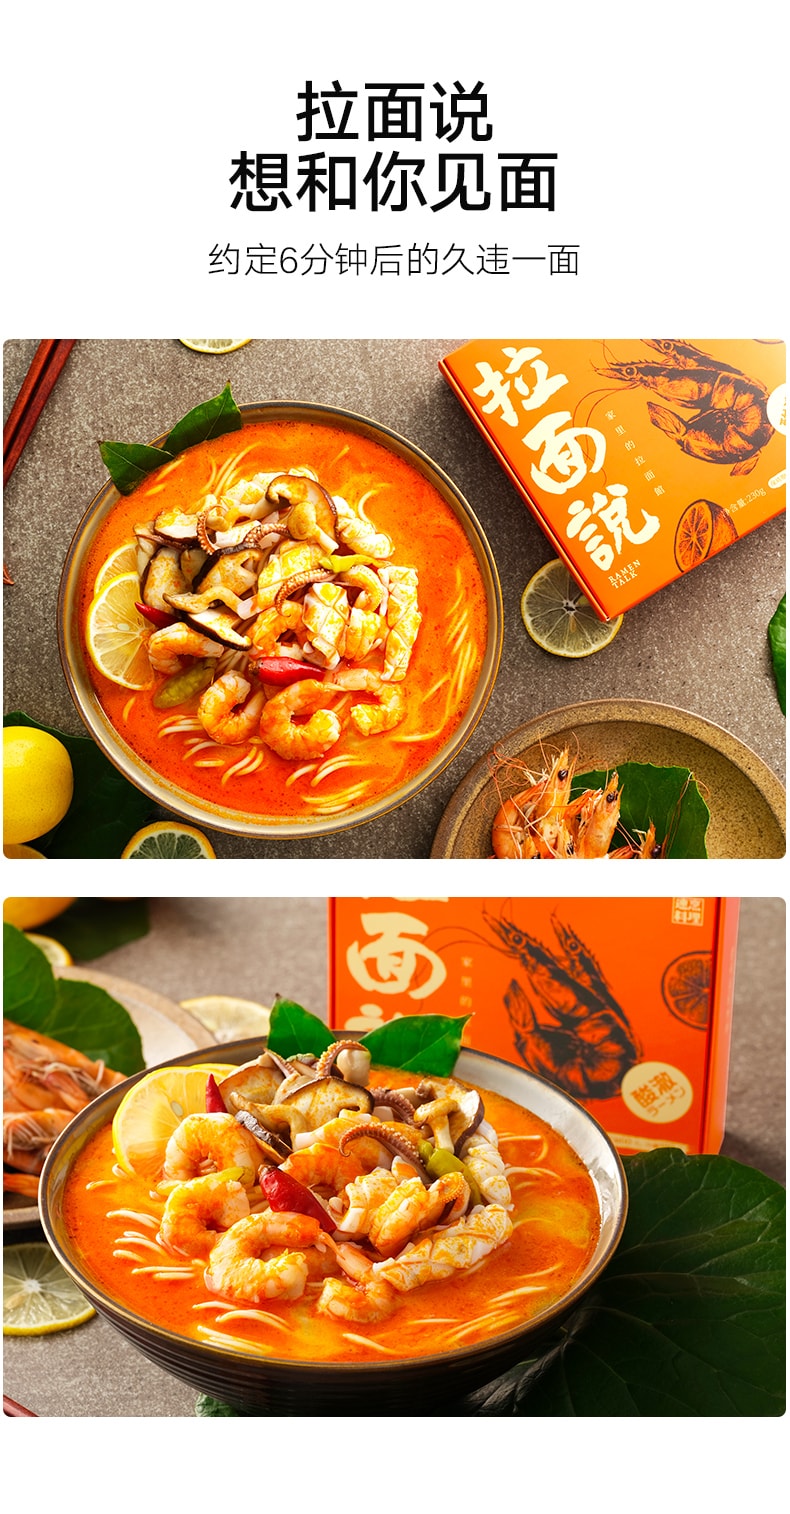 Thai Tom Yum Soup With Seafood Fried-free Instant Noodle 240g